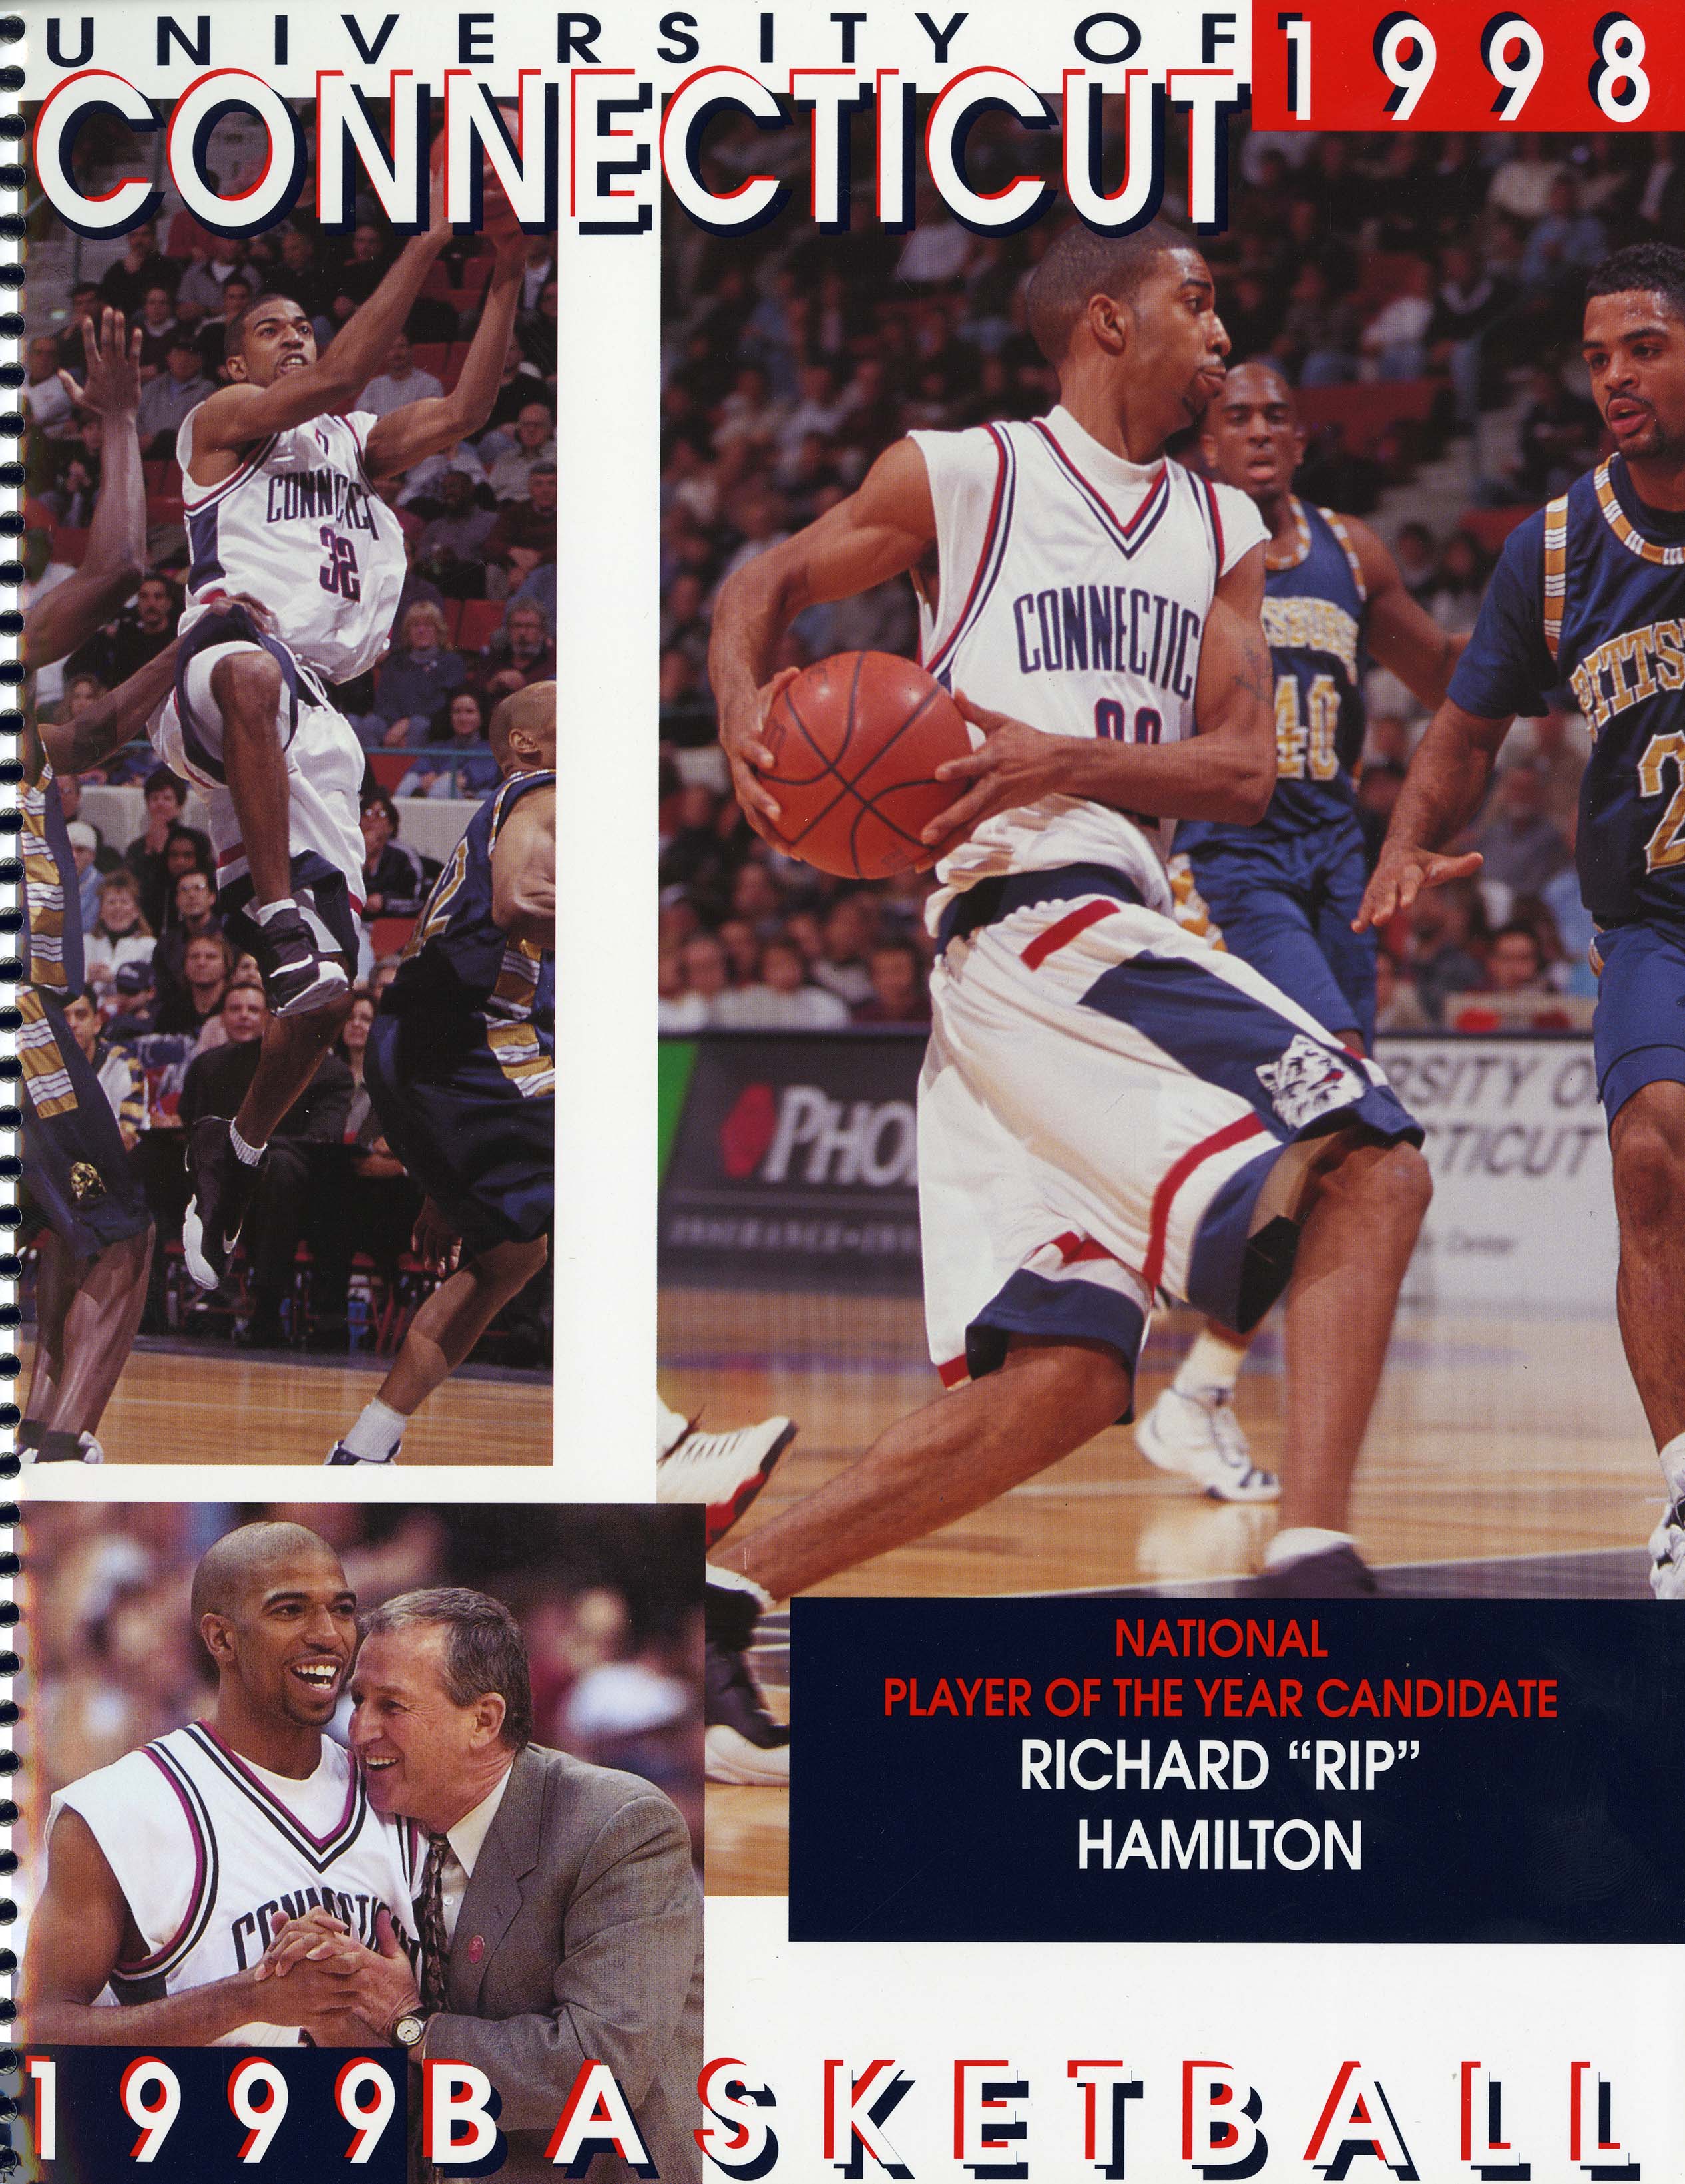 1999 Men's Basketball Championship Yearbook cover